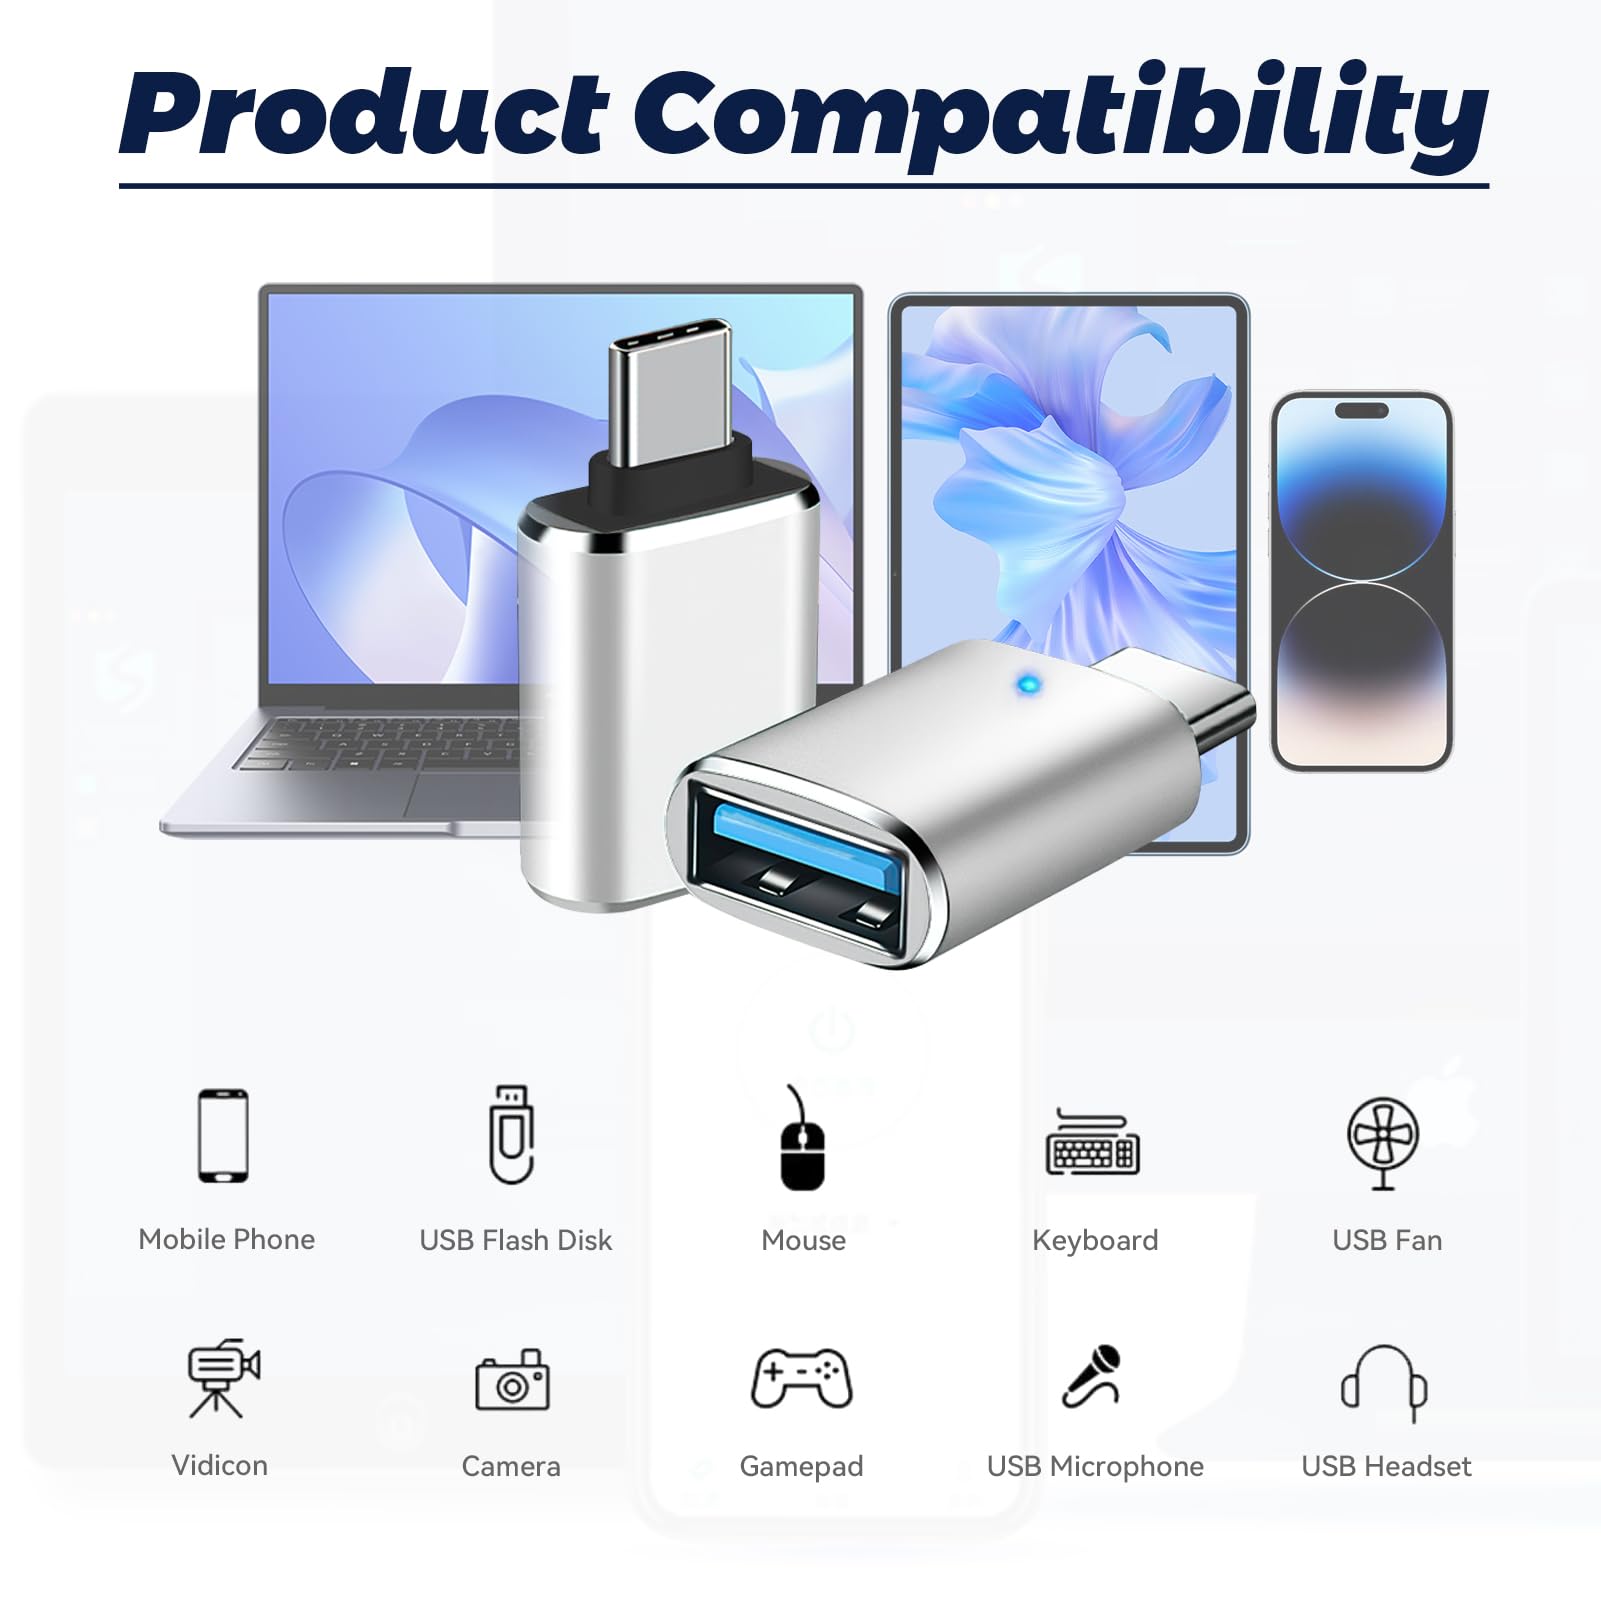 2 Pack USB to USB C Adapter, Type C to USB 3.0 Converters for Macbook Air 2020,Samsung Notebook 9, Dell Xps,Laptop,I-Pad,Other Type C Devices,Durable,High Speed Charging,Data Transfer